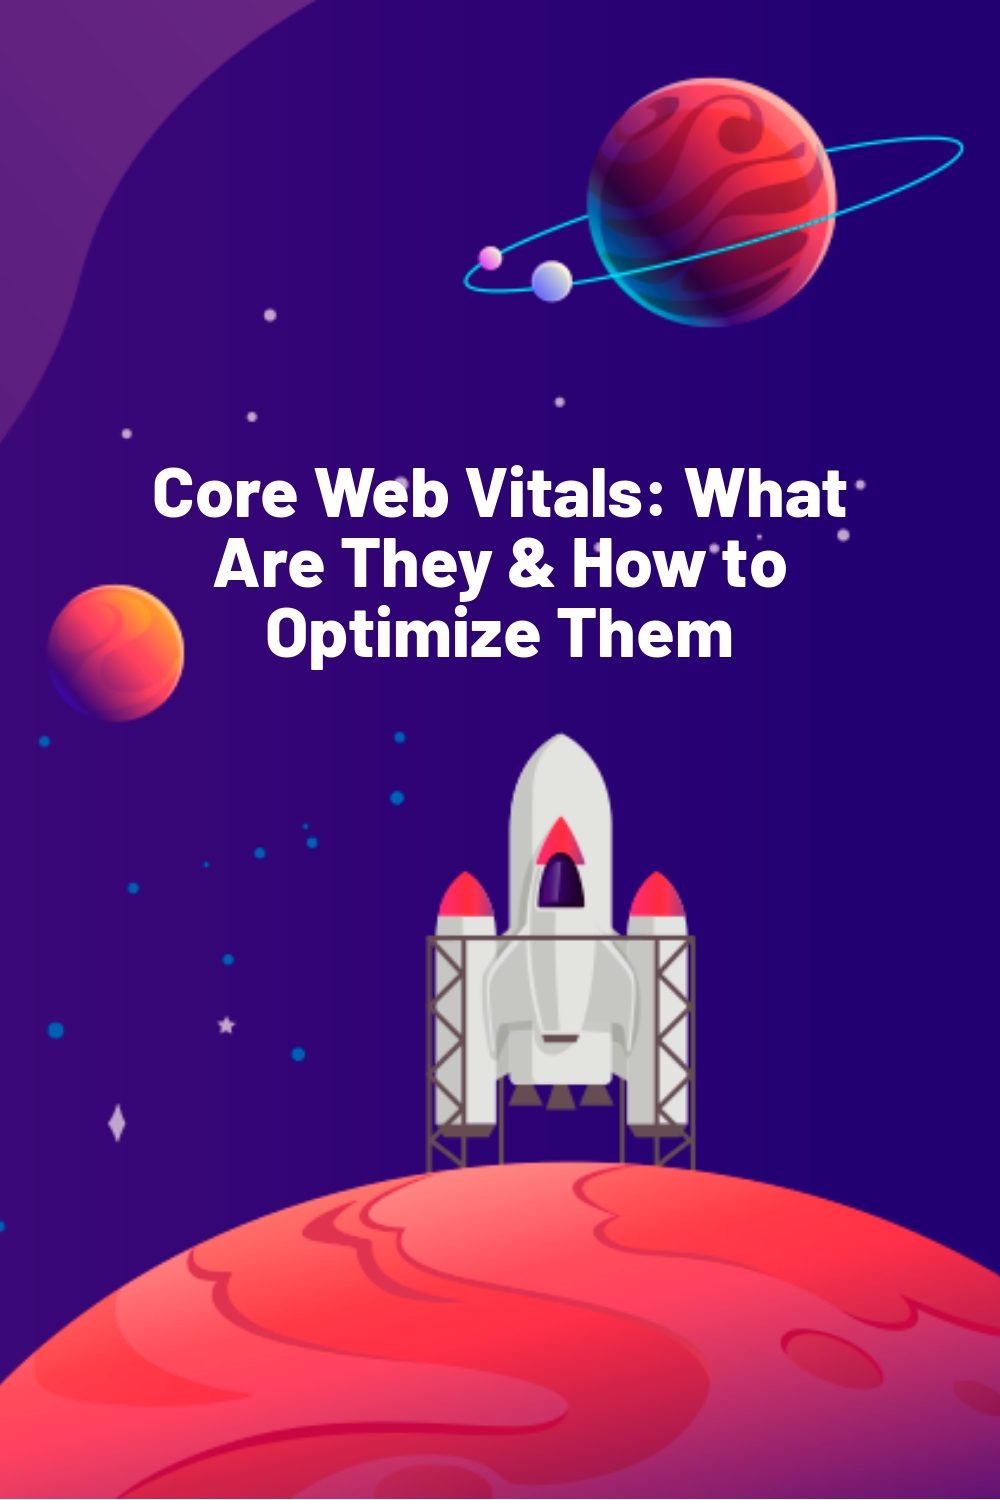 Core Web Vitals: What Are They & How to Optimize Them